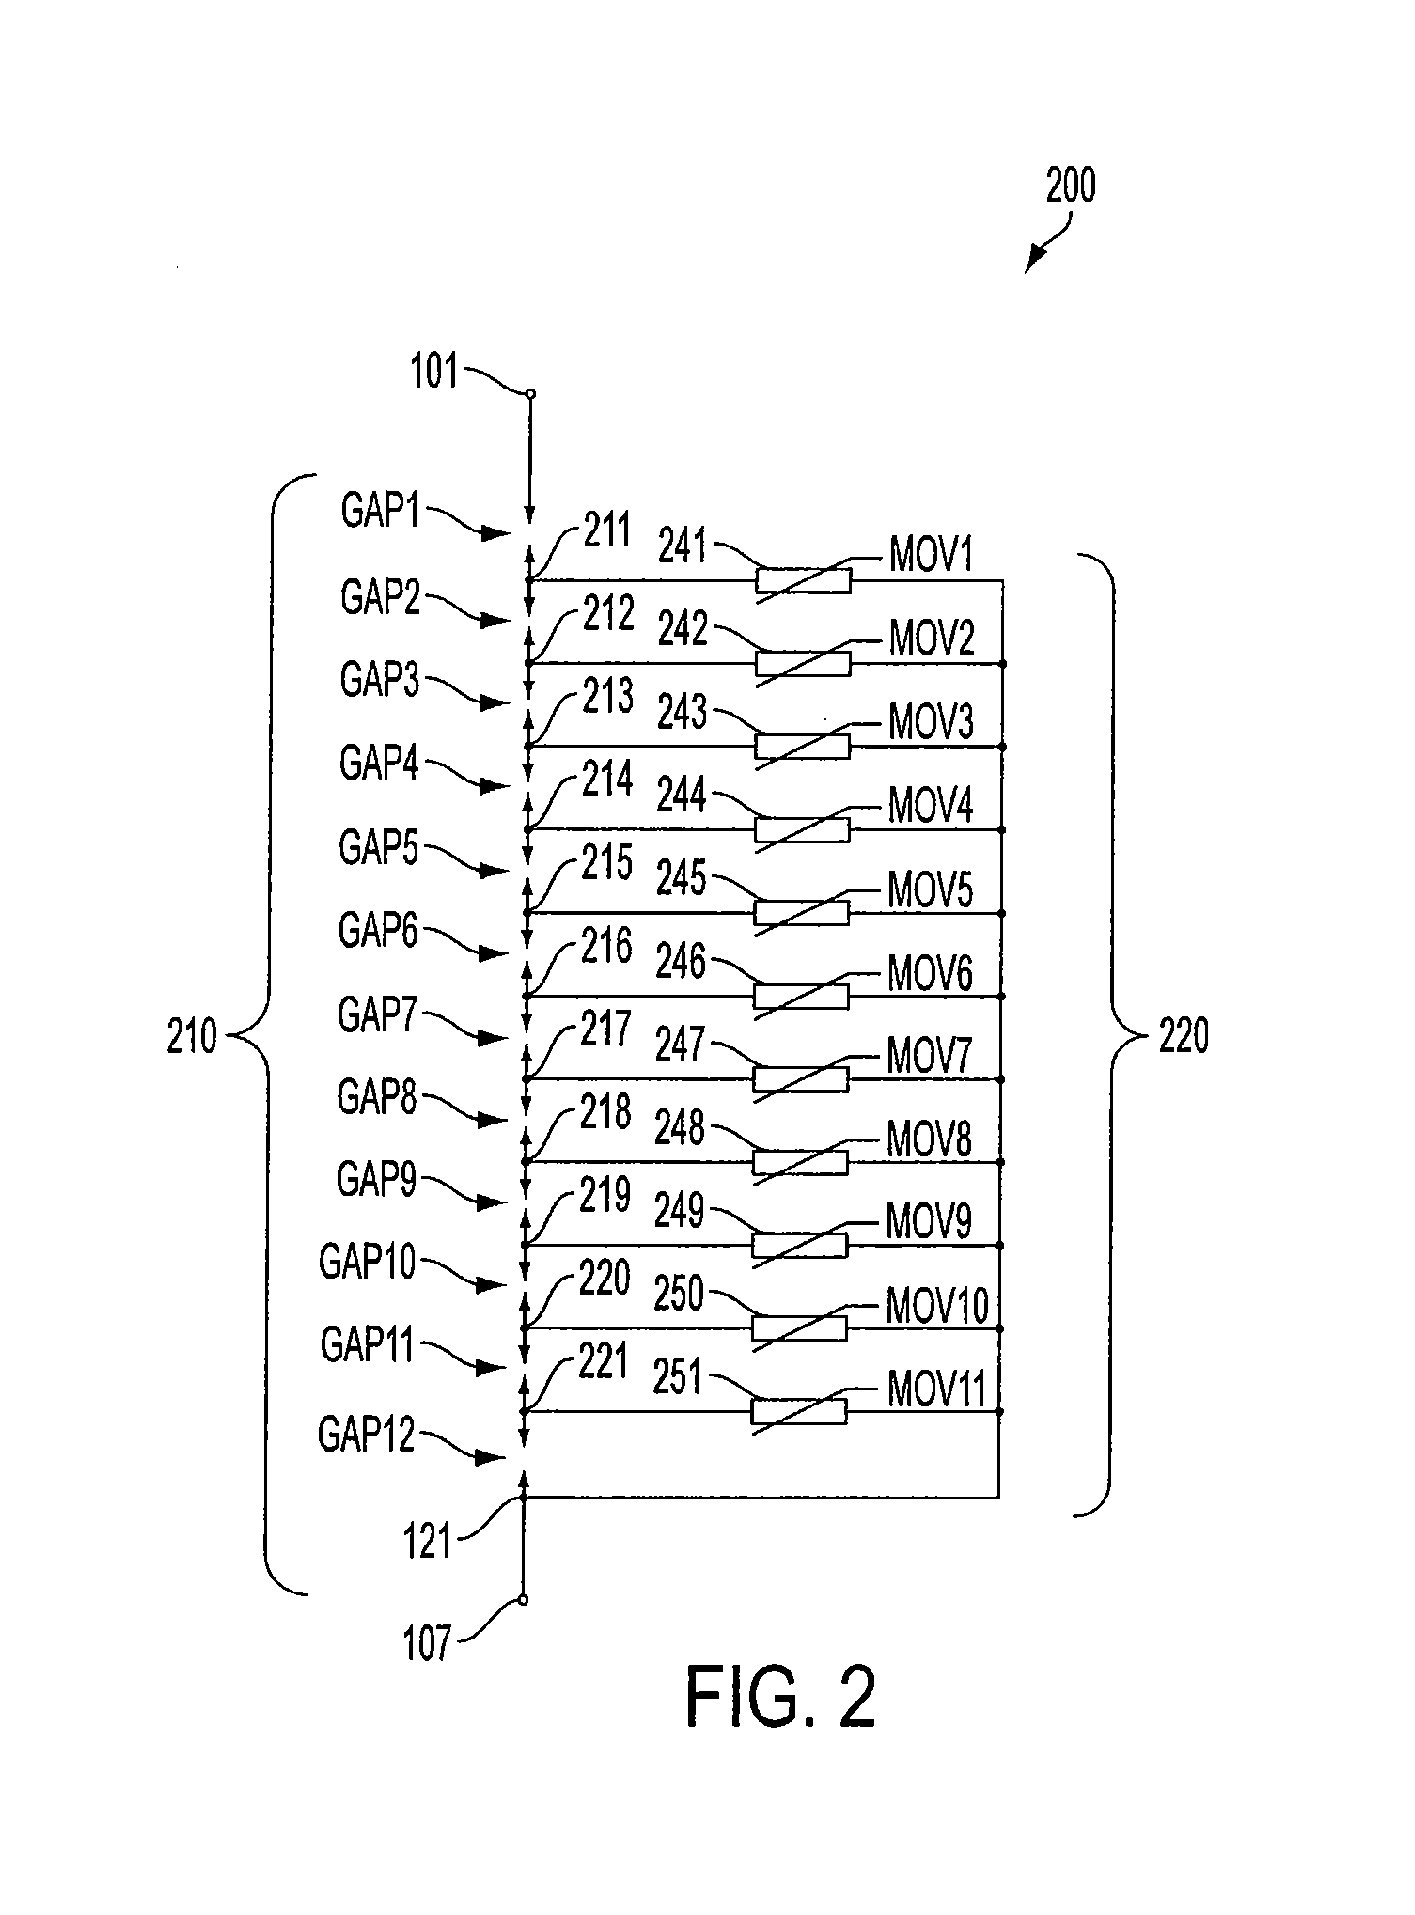 SURGE PROTECTION DEVICE USING METAL OXIDE VARISTORS (MOVs) AS THE ACTIVE ENERGY CONTROL MULTIPLE GAP DISCHARGING CHAIN